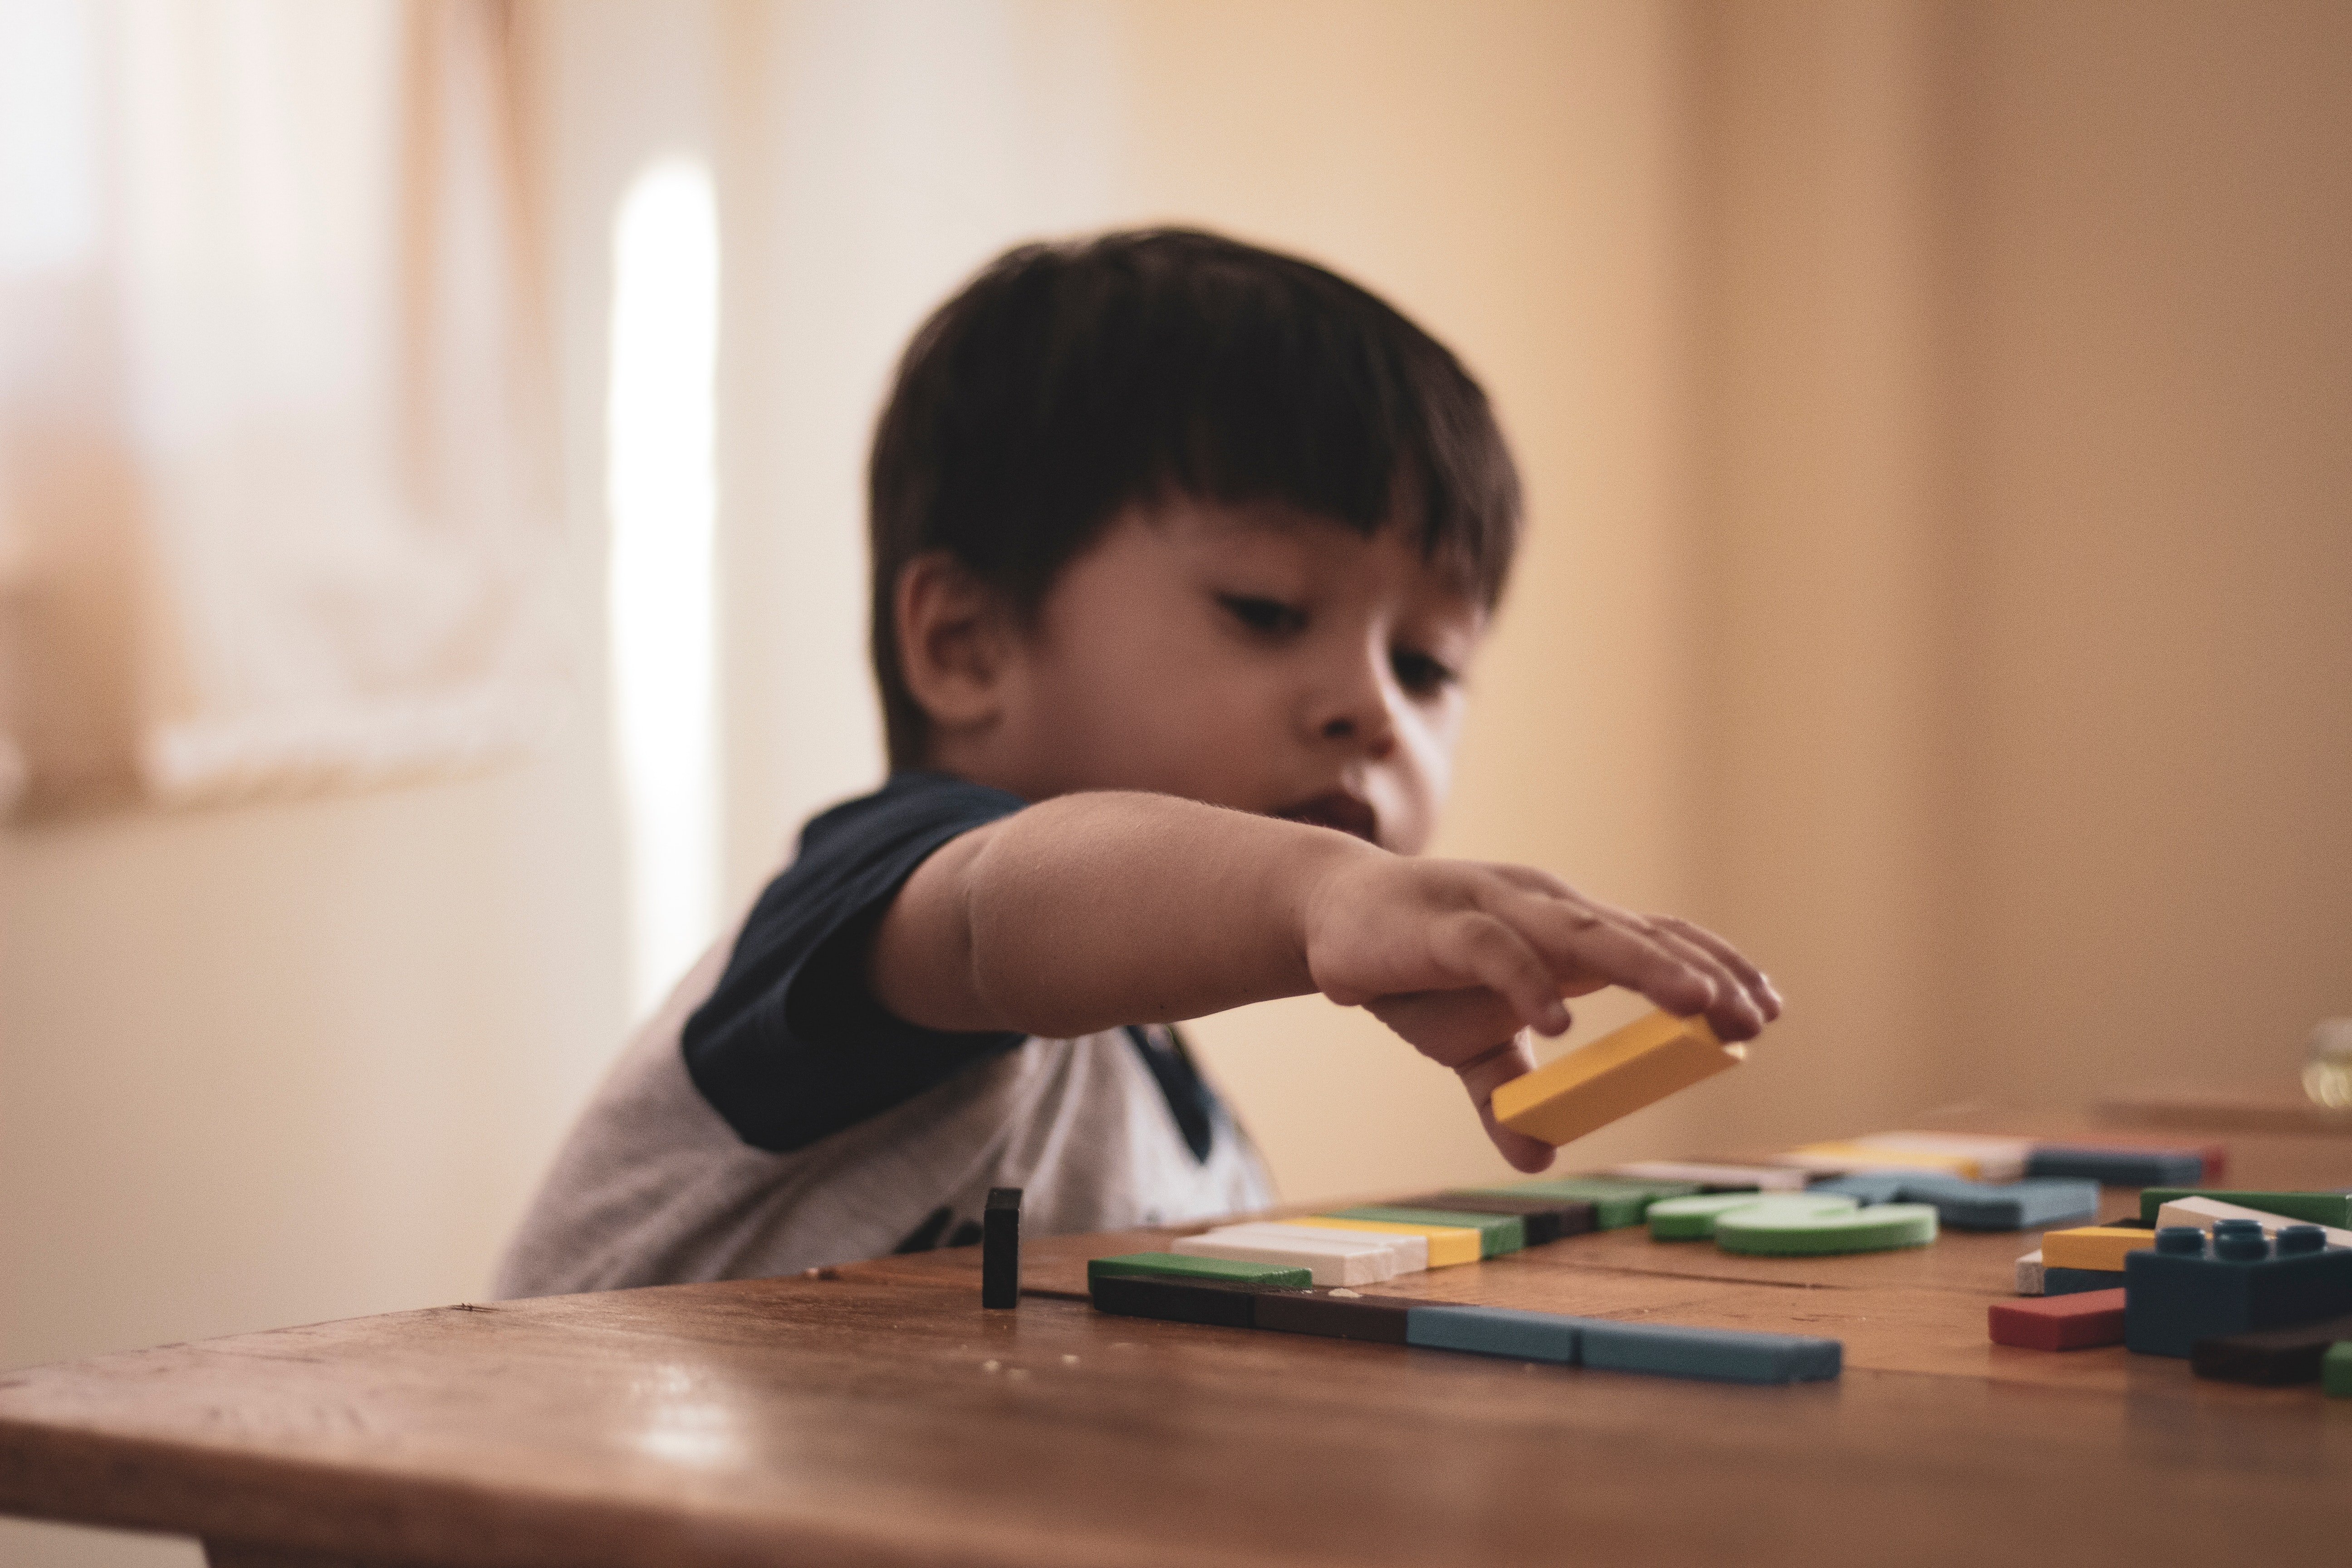 Kid playing with wooden blocks. | Source: Pexels